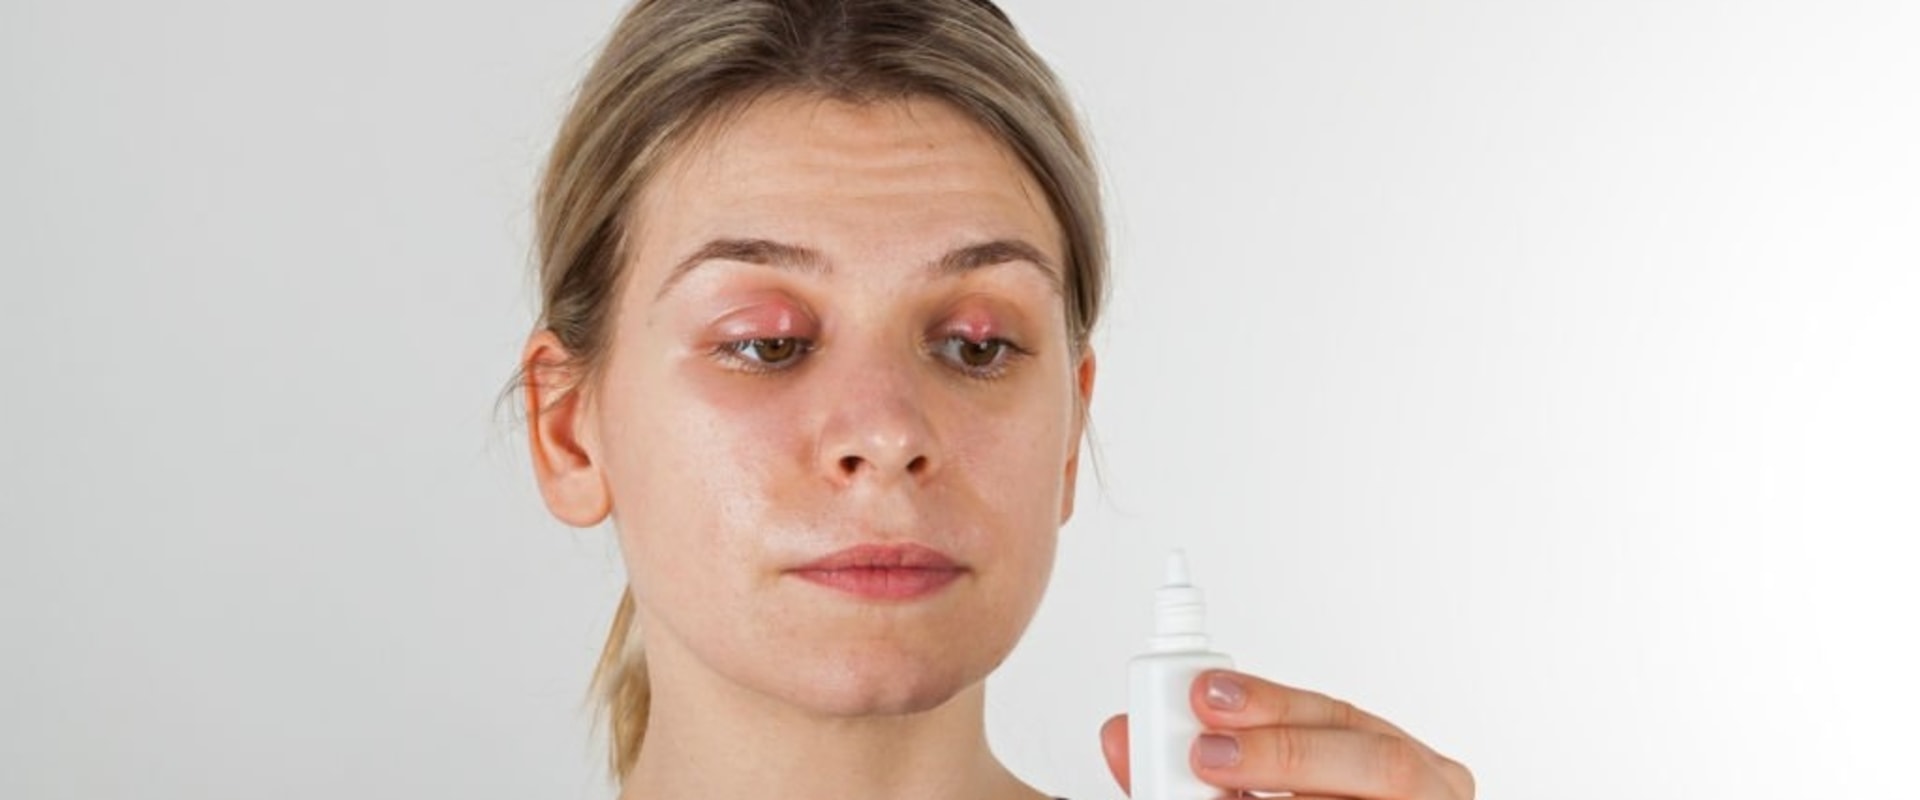 What causes eyelash extension infection?